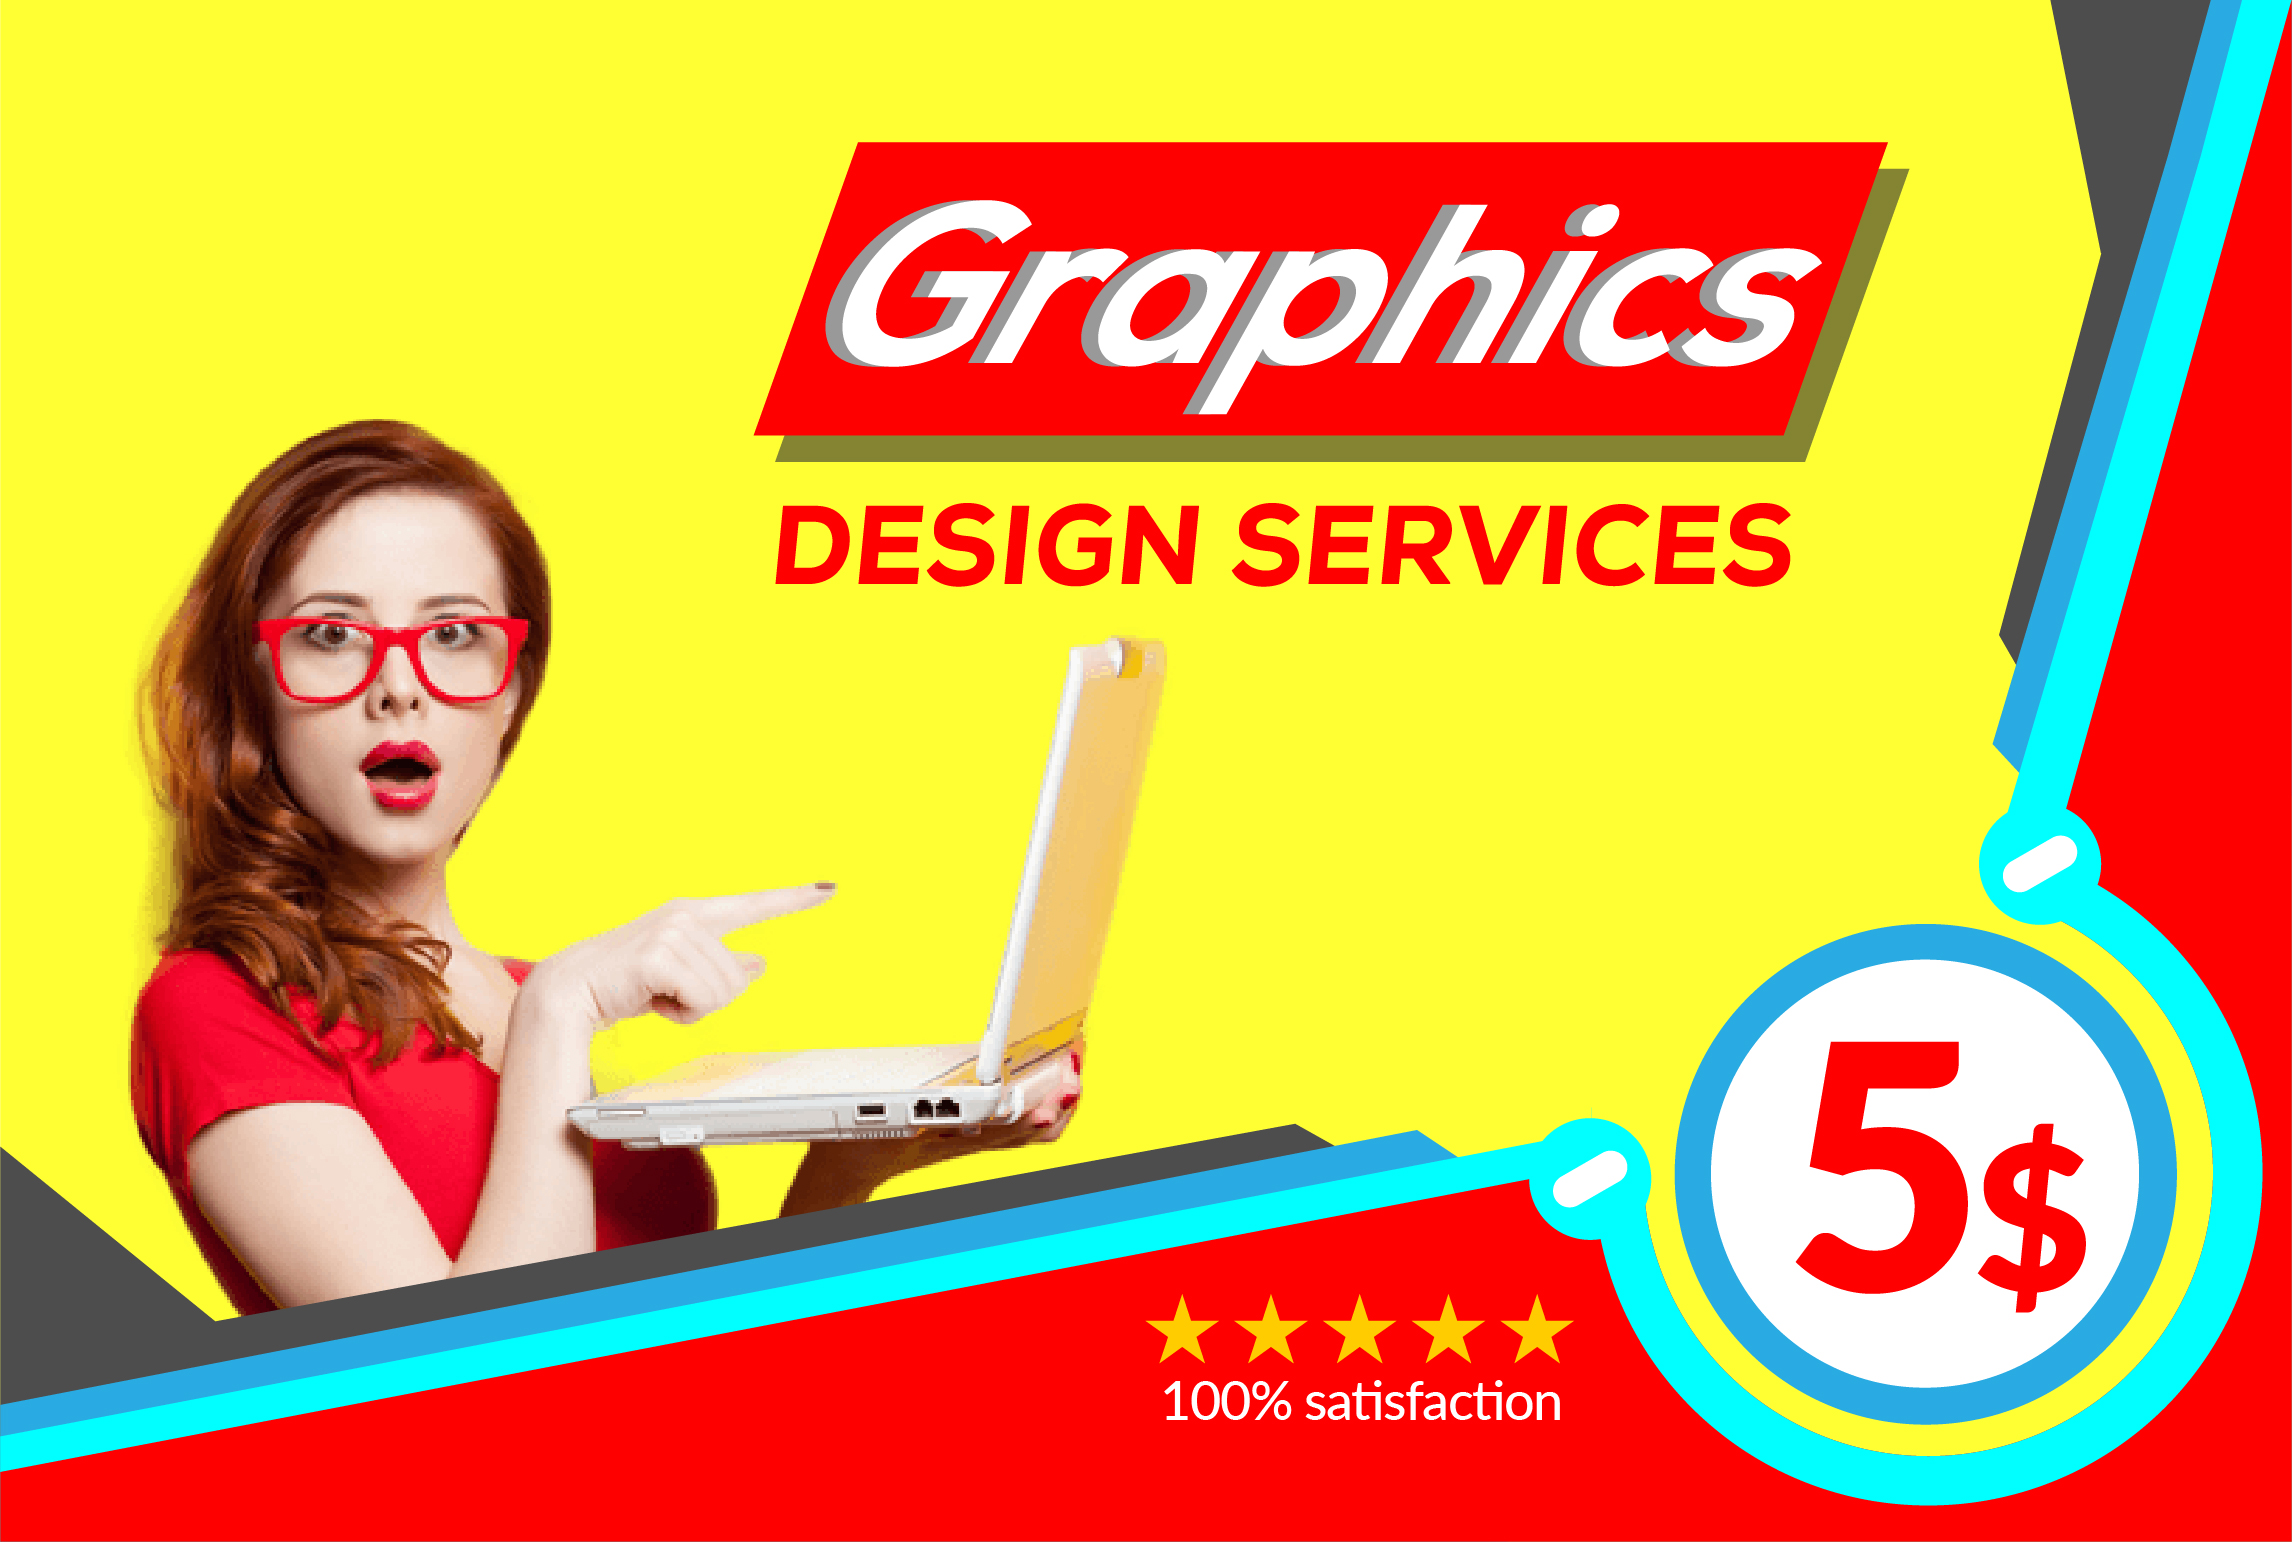 In 3 hours do any graphics design work